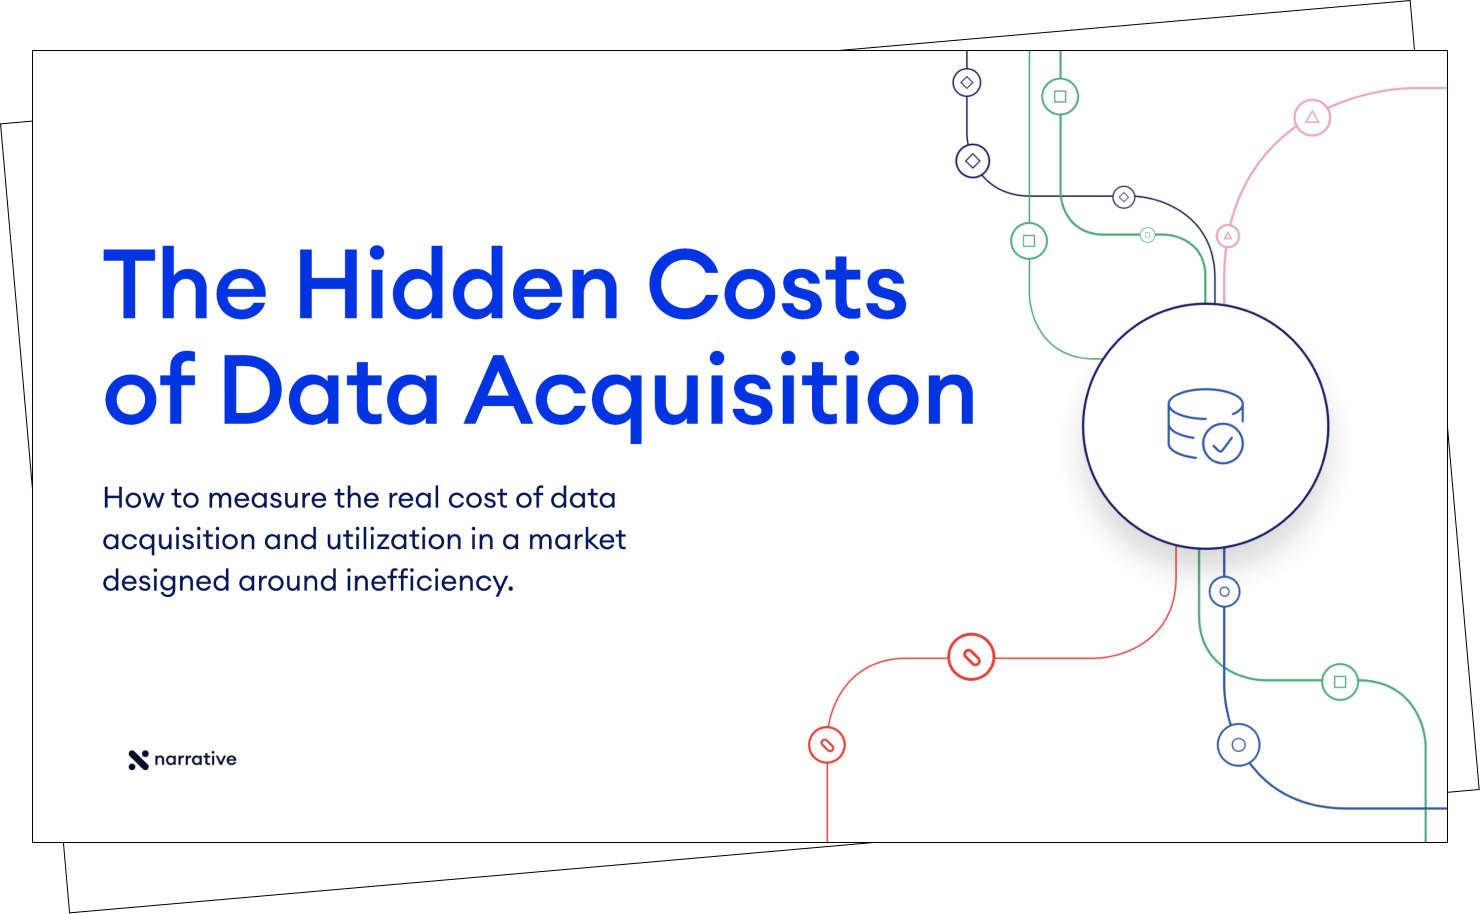 The Hidden Costs of Data Acquisition